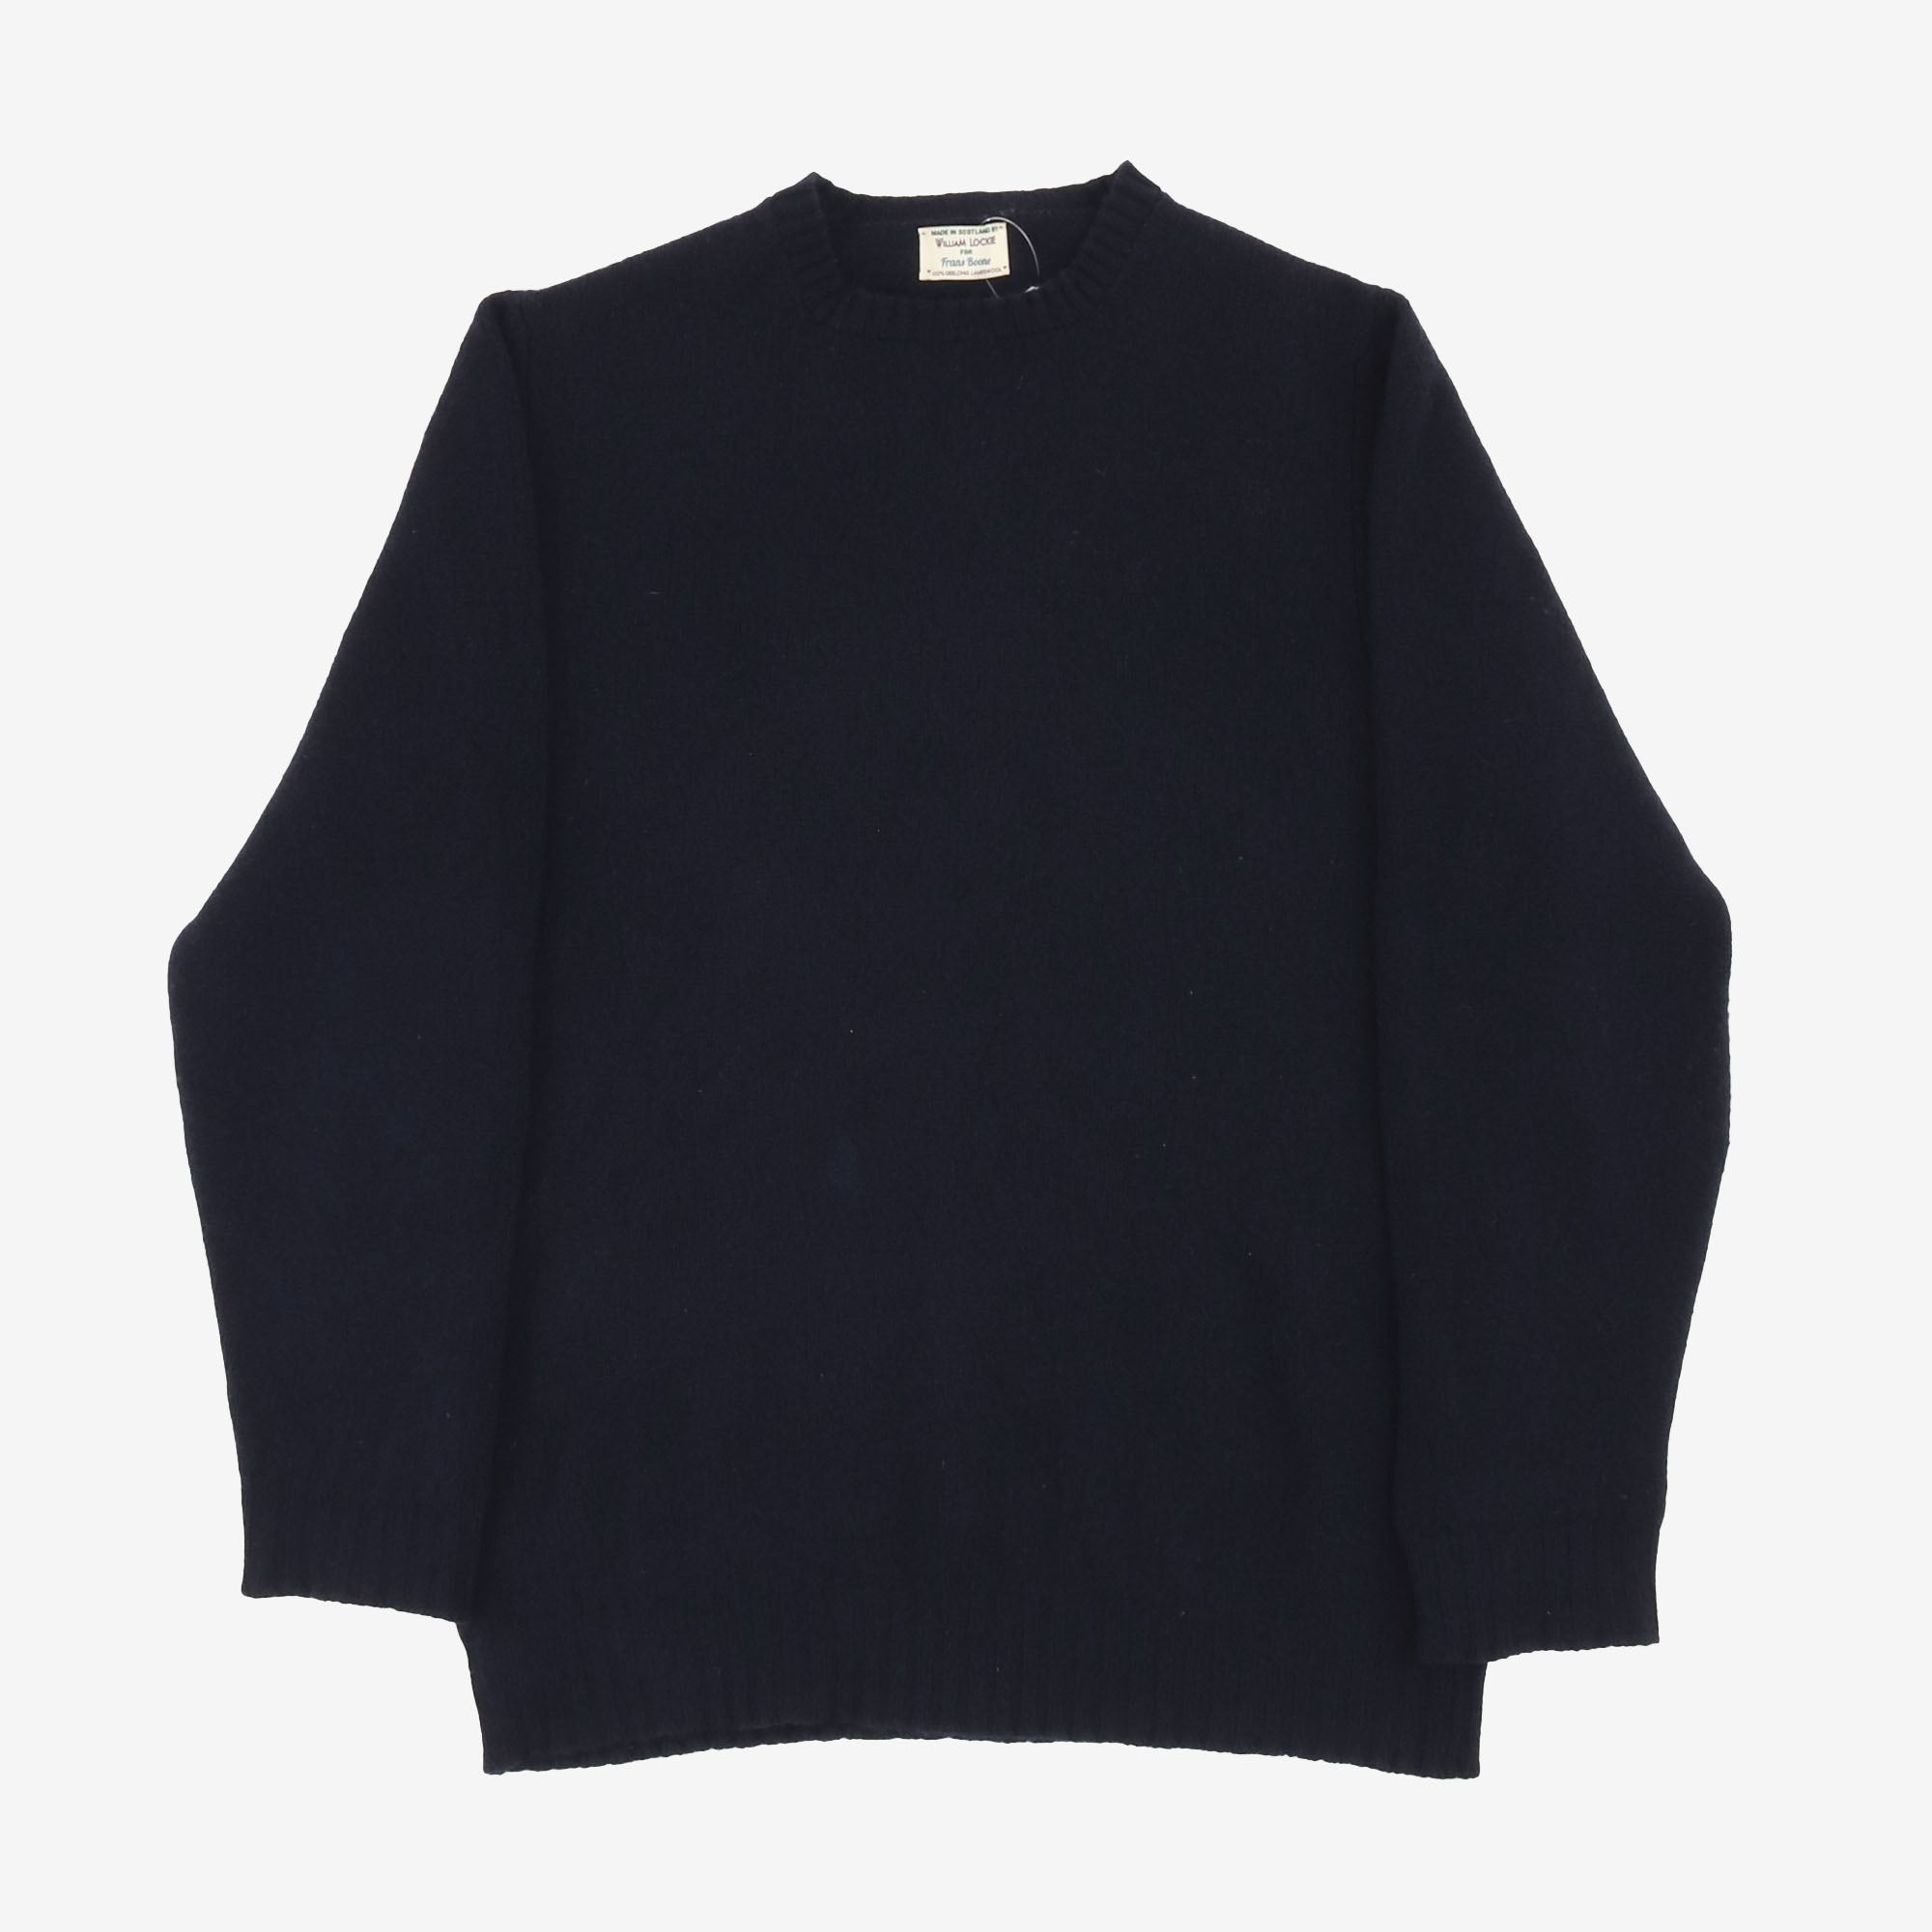 Frans Boone Knit Sweater